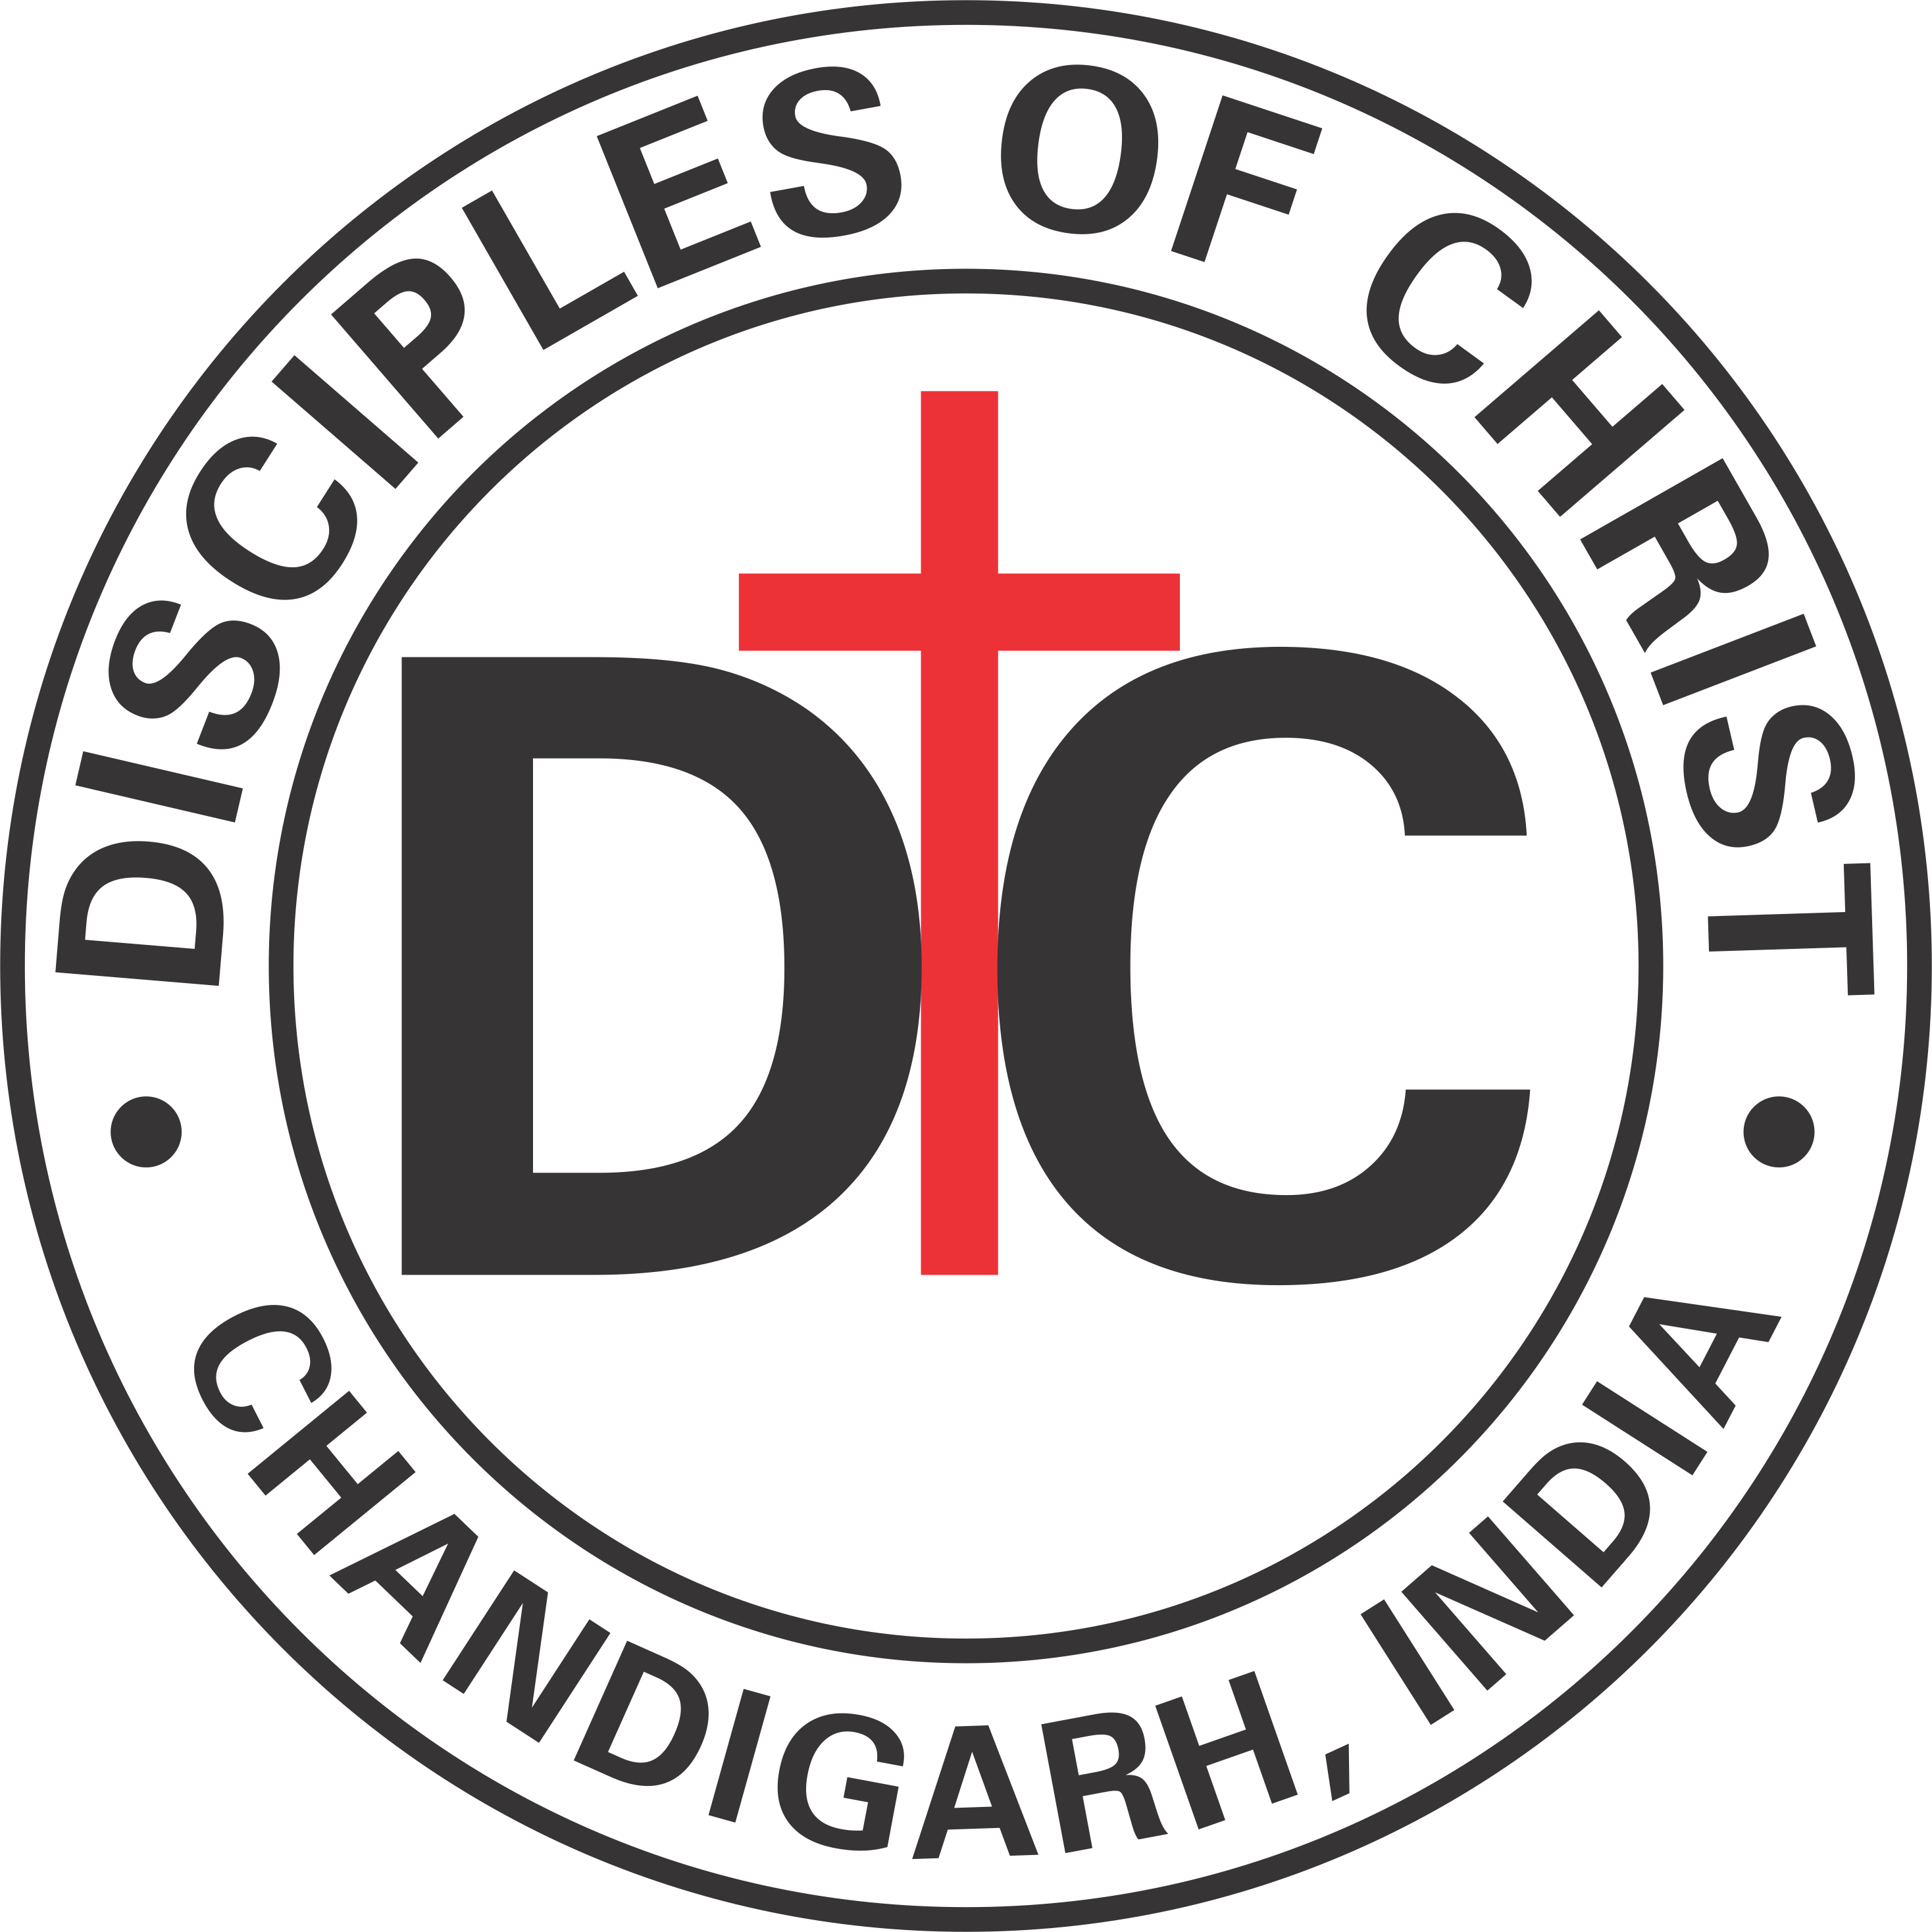 Disciples of Christ, INDIA